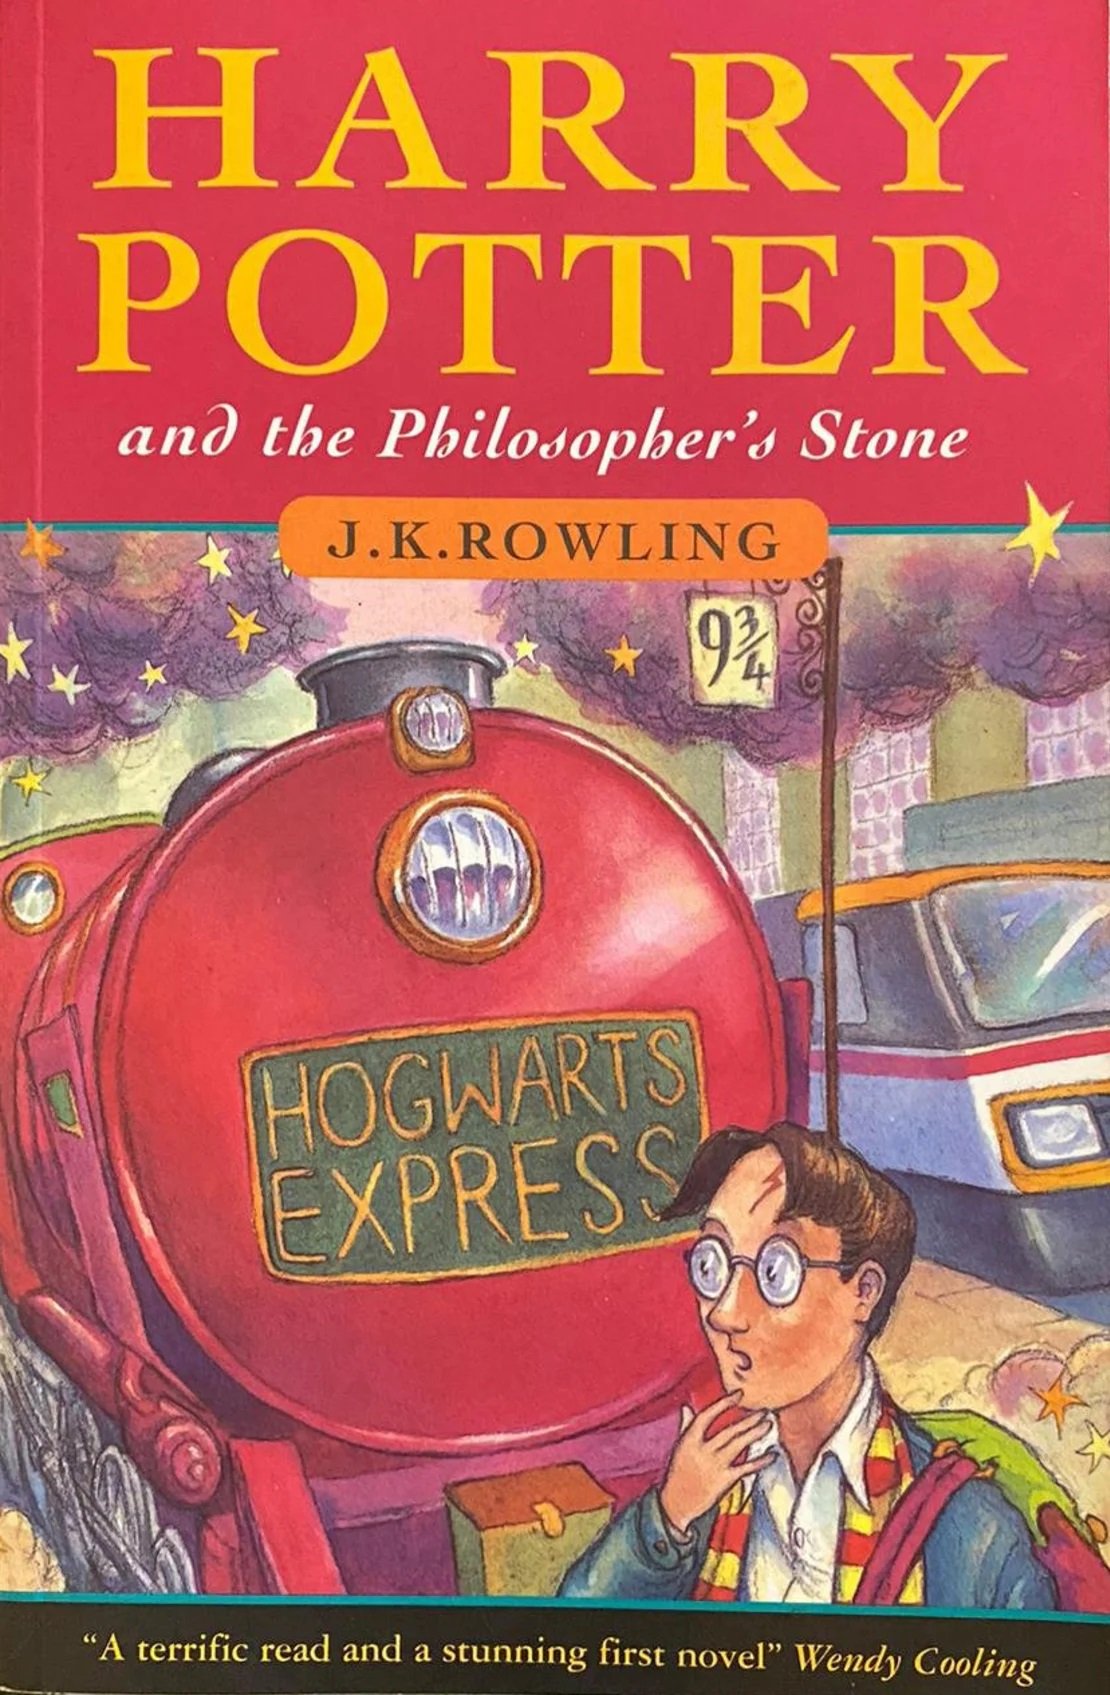 ‘Harry Potter and the Philosopher's Stone' original cover art set to break auction records